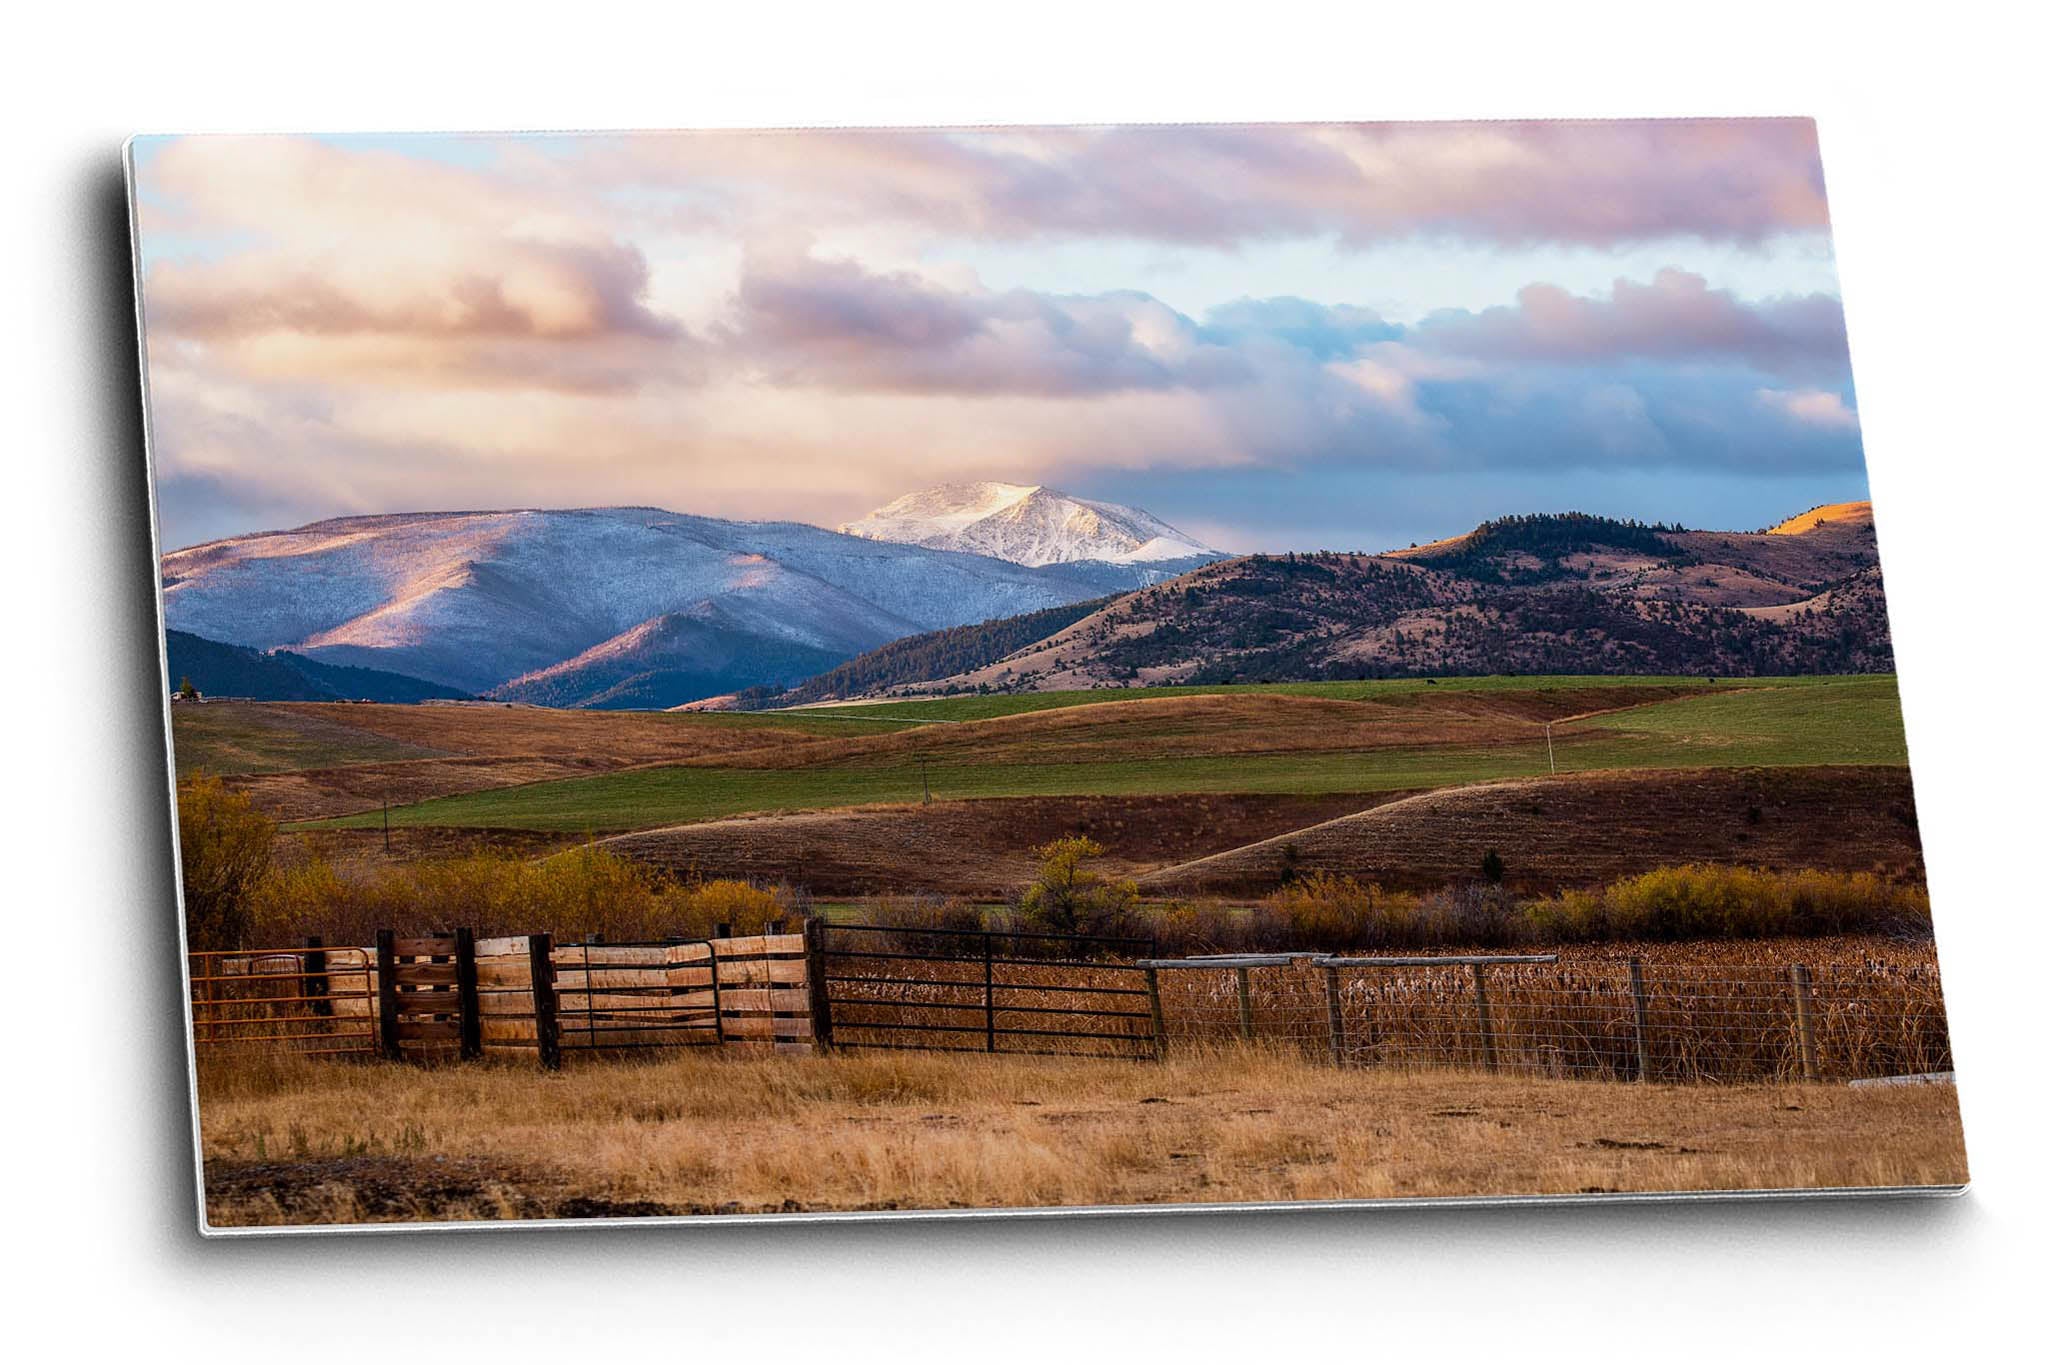 Rocky Mountain landscape metal print of a snowy peak overlooking a mountain valley on an autumn morning in Montana by Sean Ramsey of Southern Plains Photography.